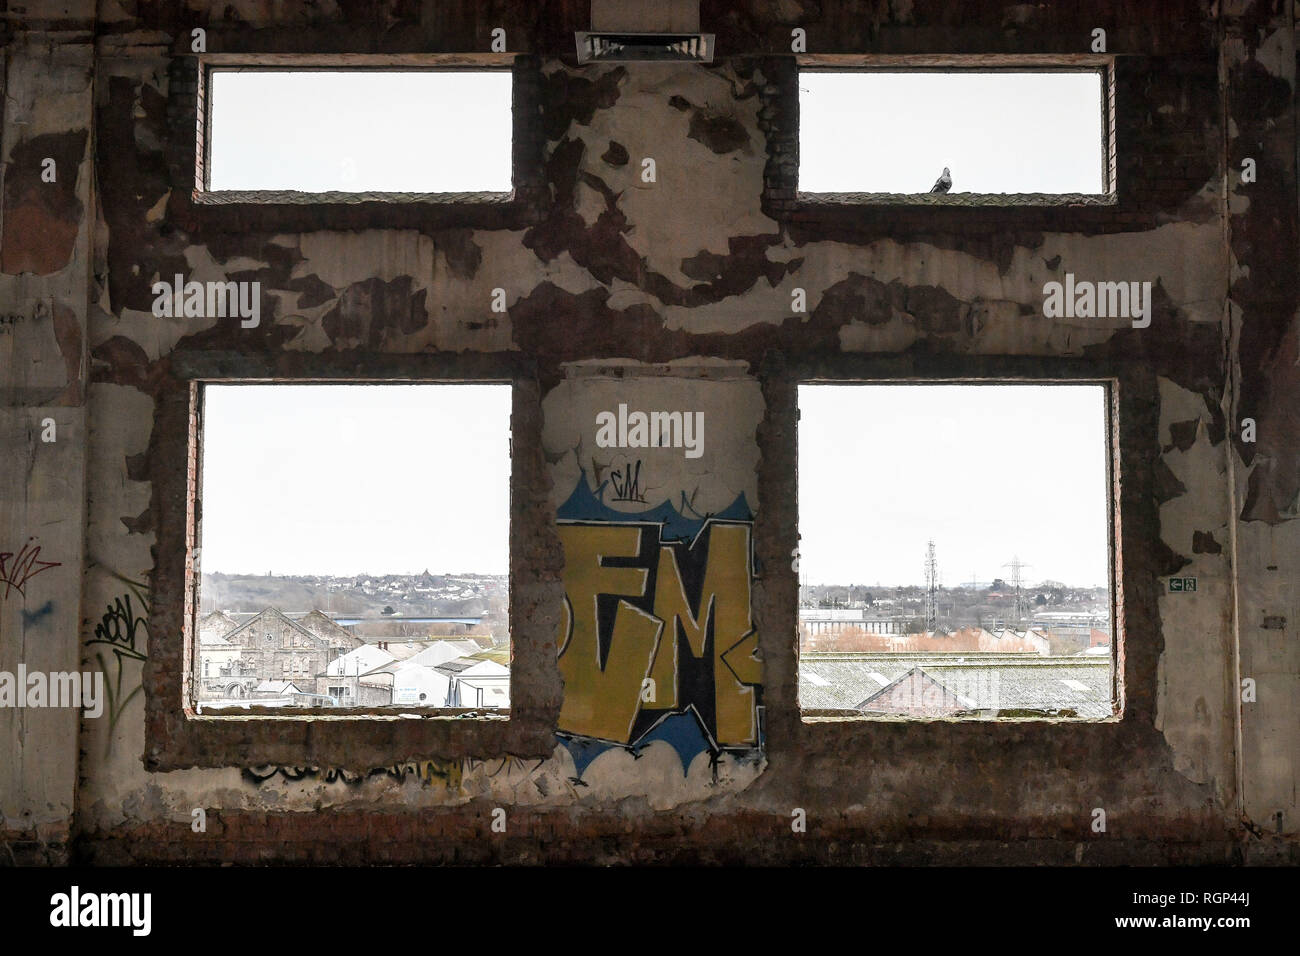 A small patch of old graffiti remains between flakey window apertures, inside the former Bristol Royal Mail sorting office, which is scheduled for demolition on 30th January 2019 after standing empty for 22 years, bringing an end to a building that became a playground for squatters, illegal ravers and fledgling graffiti artists. Stock Photo